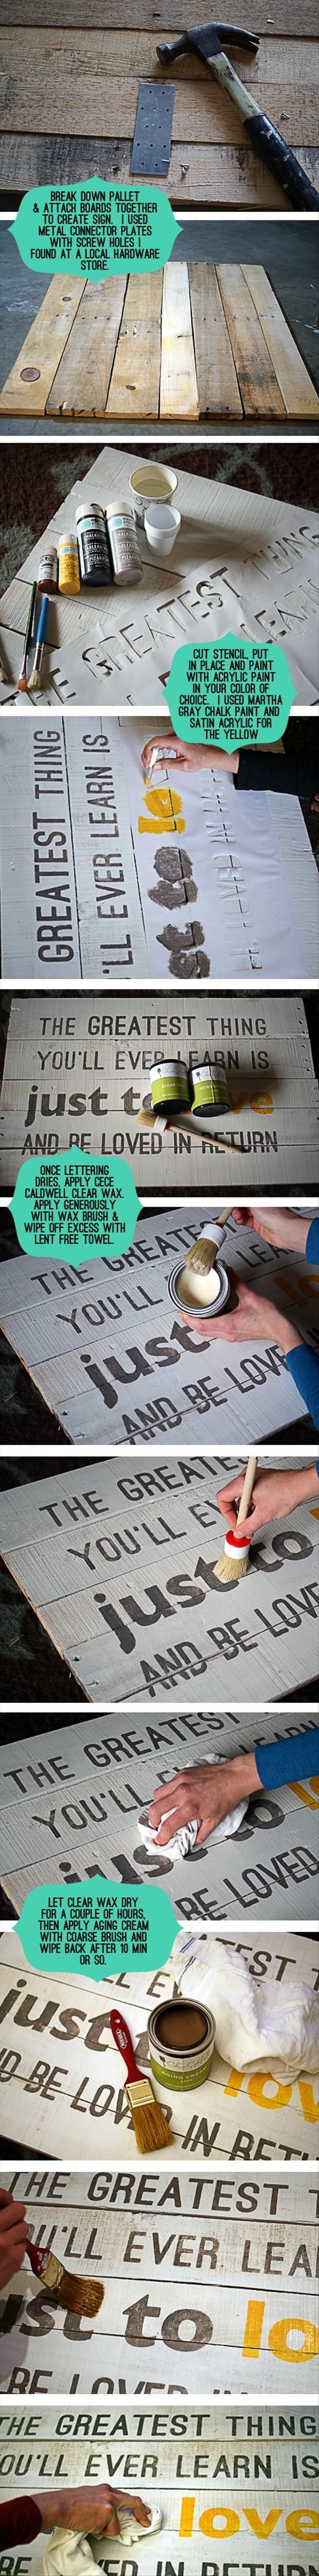 Pallet signs -   Amazingly simple but genius ideas to use and reuse stuff